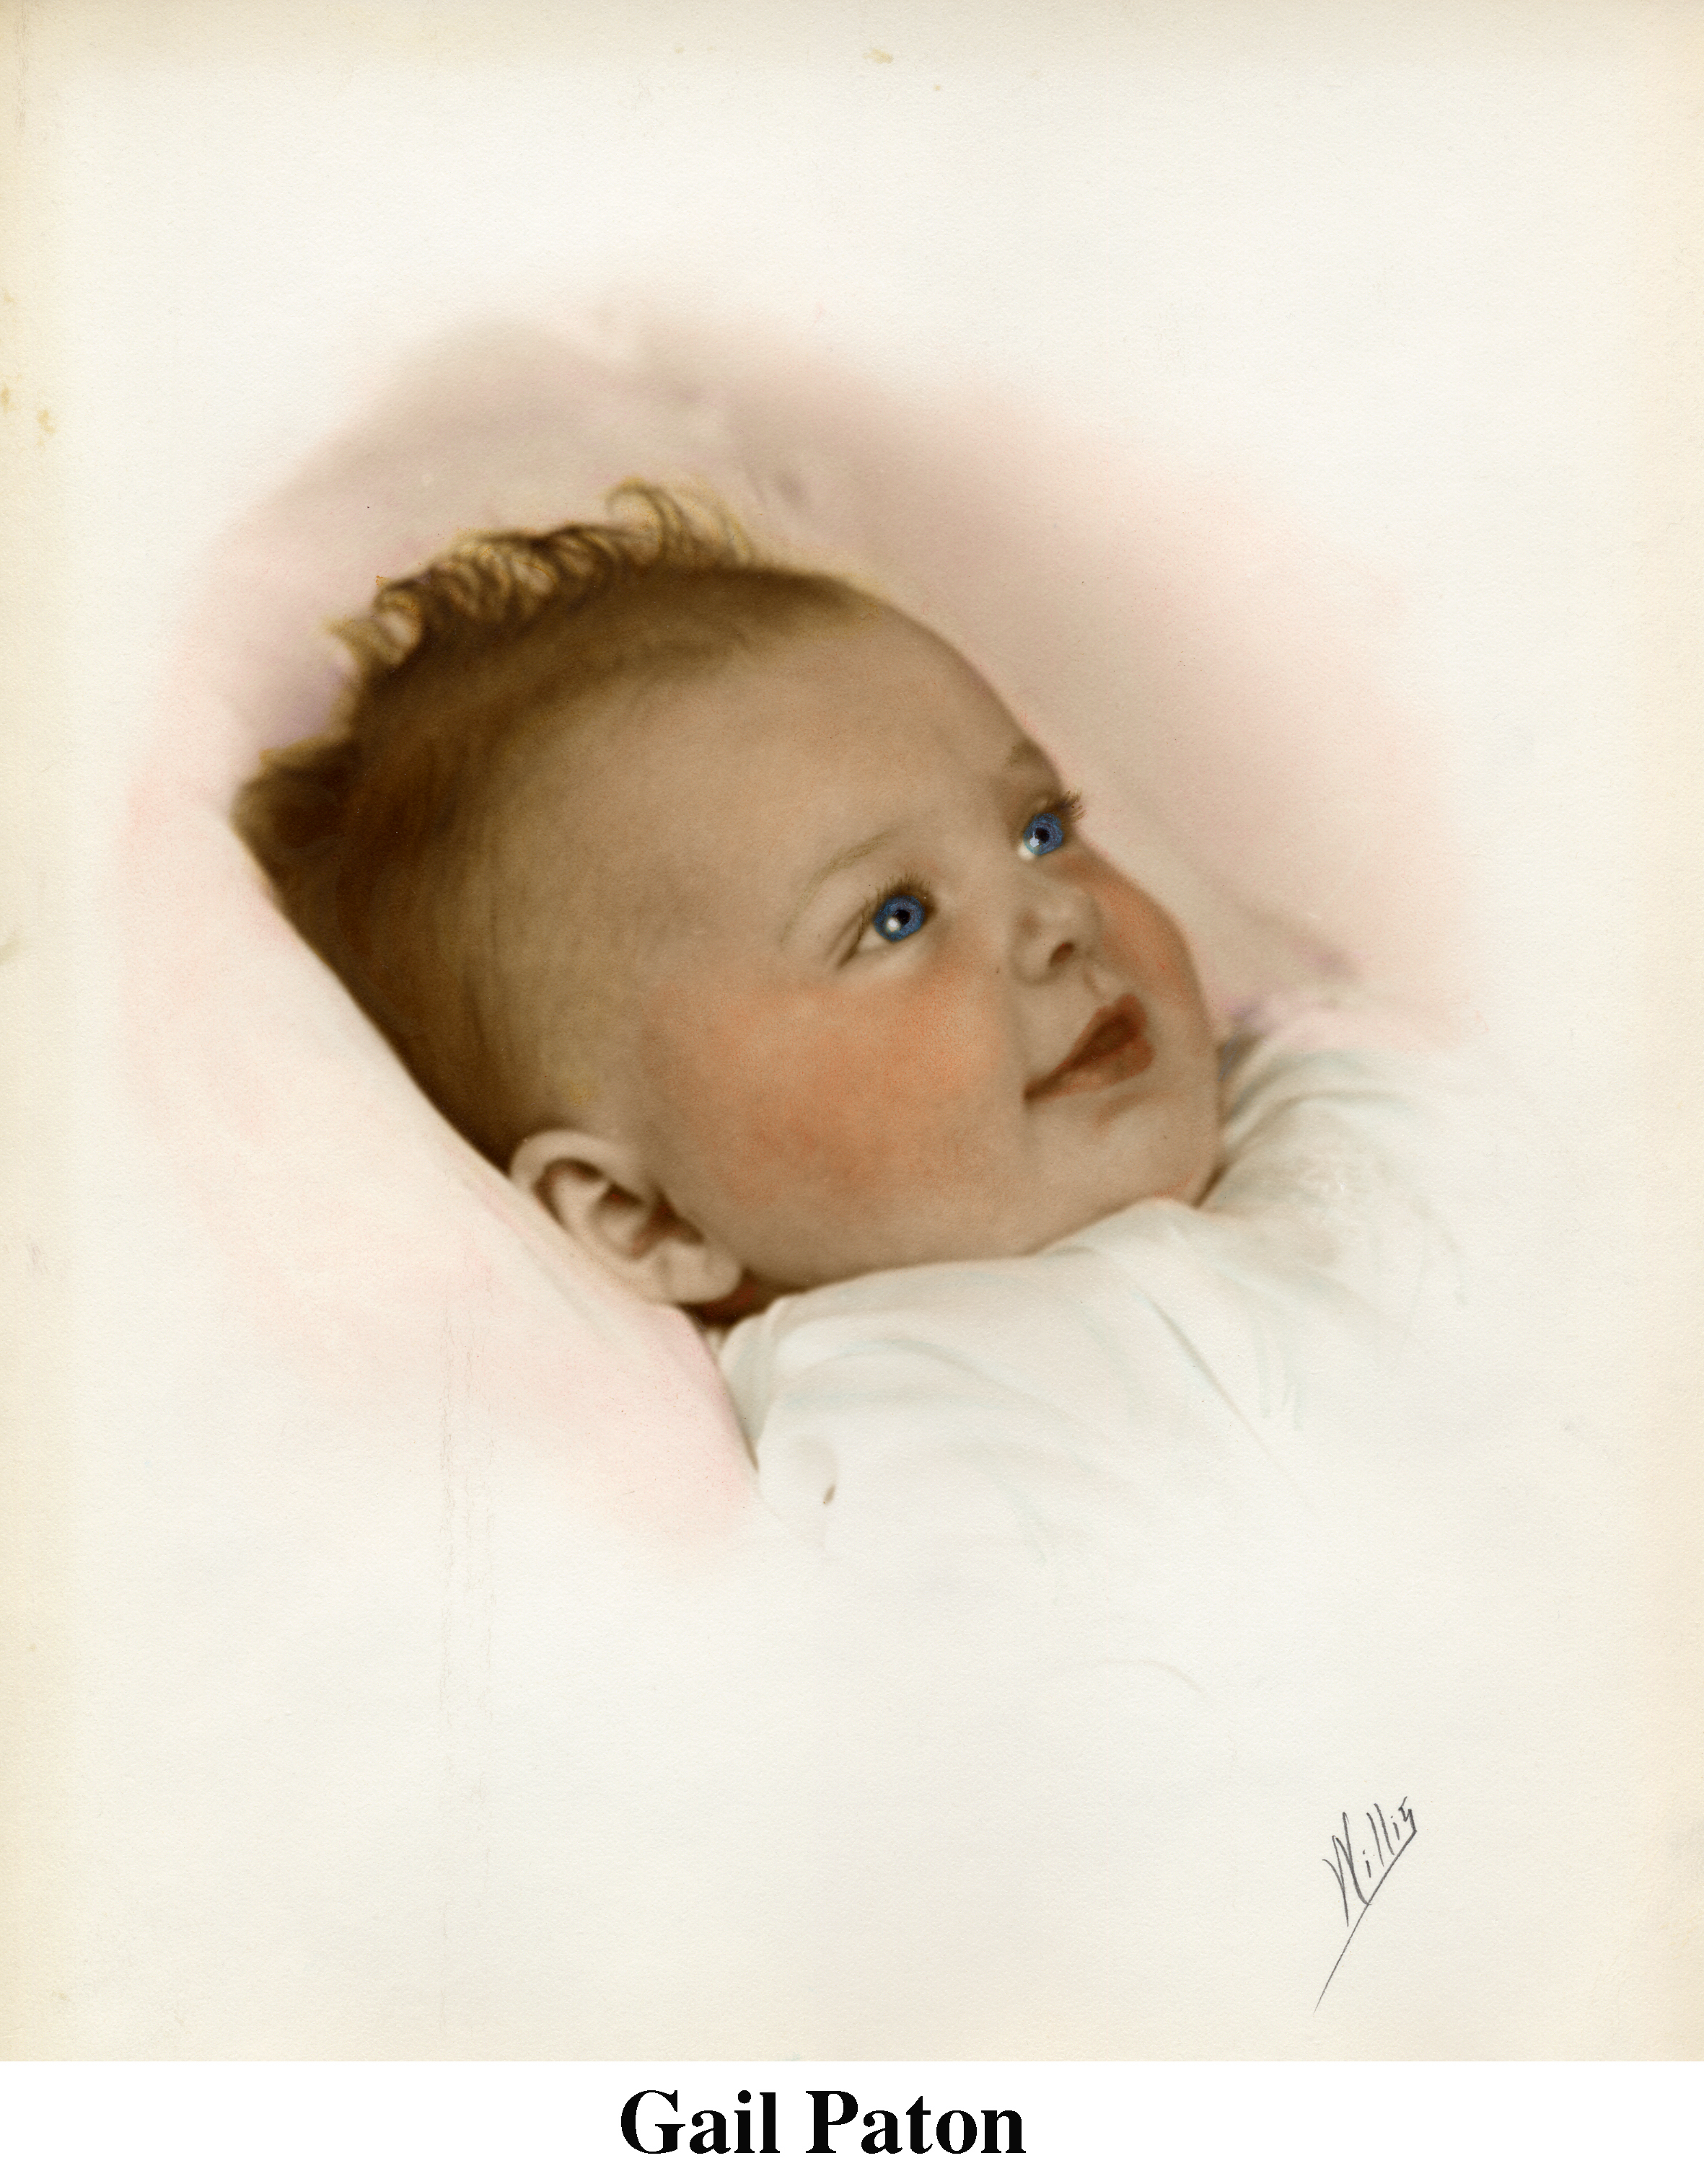 Baby picture of the smiling of Gail Paton on a pillow